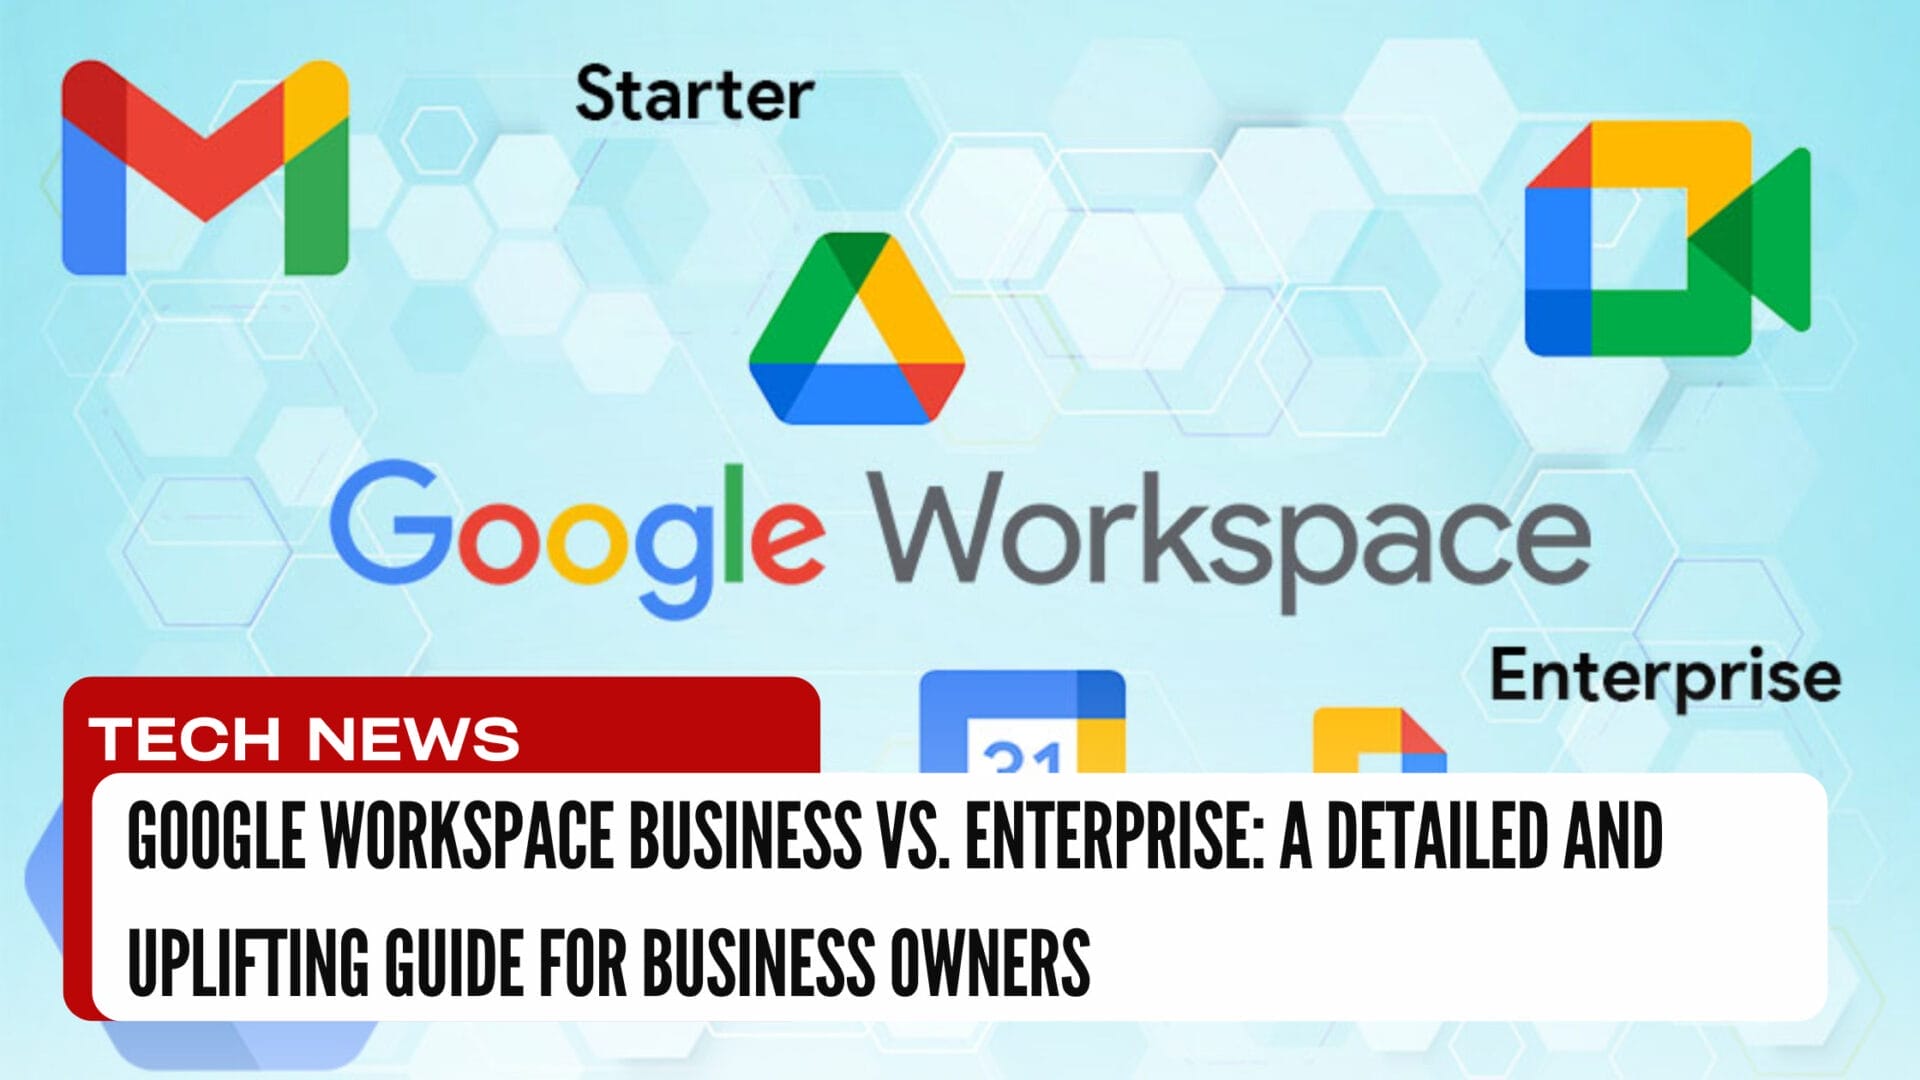 Choosing between Google Workspace Business and Enterprise packages can be daunting. This guide highlights key differences in price, support, storage, and more, ensuring you select the package that aligns perfectly with your business needs